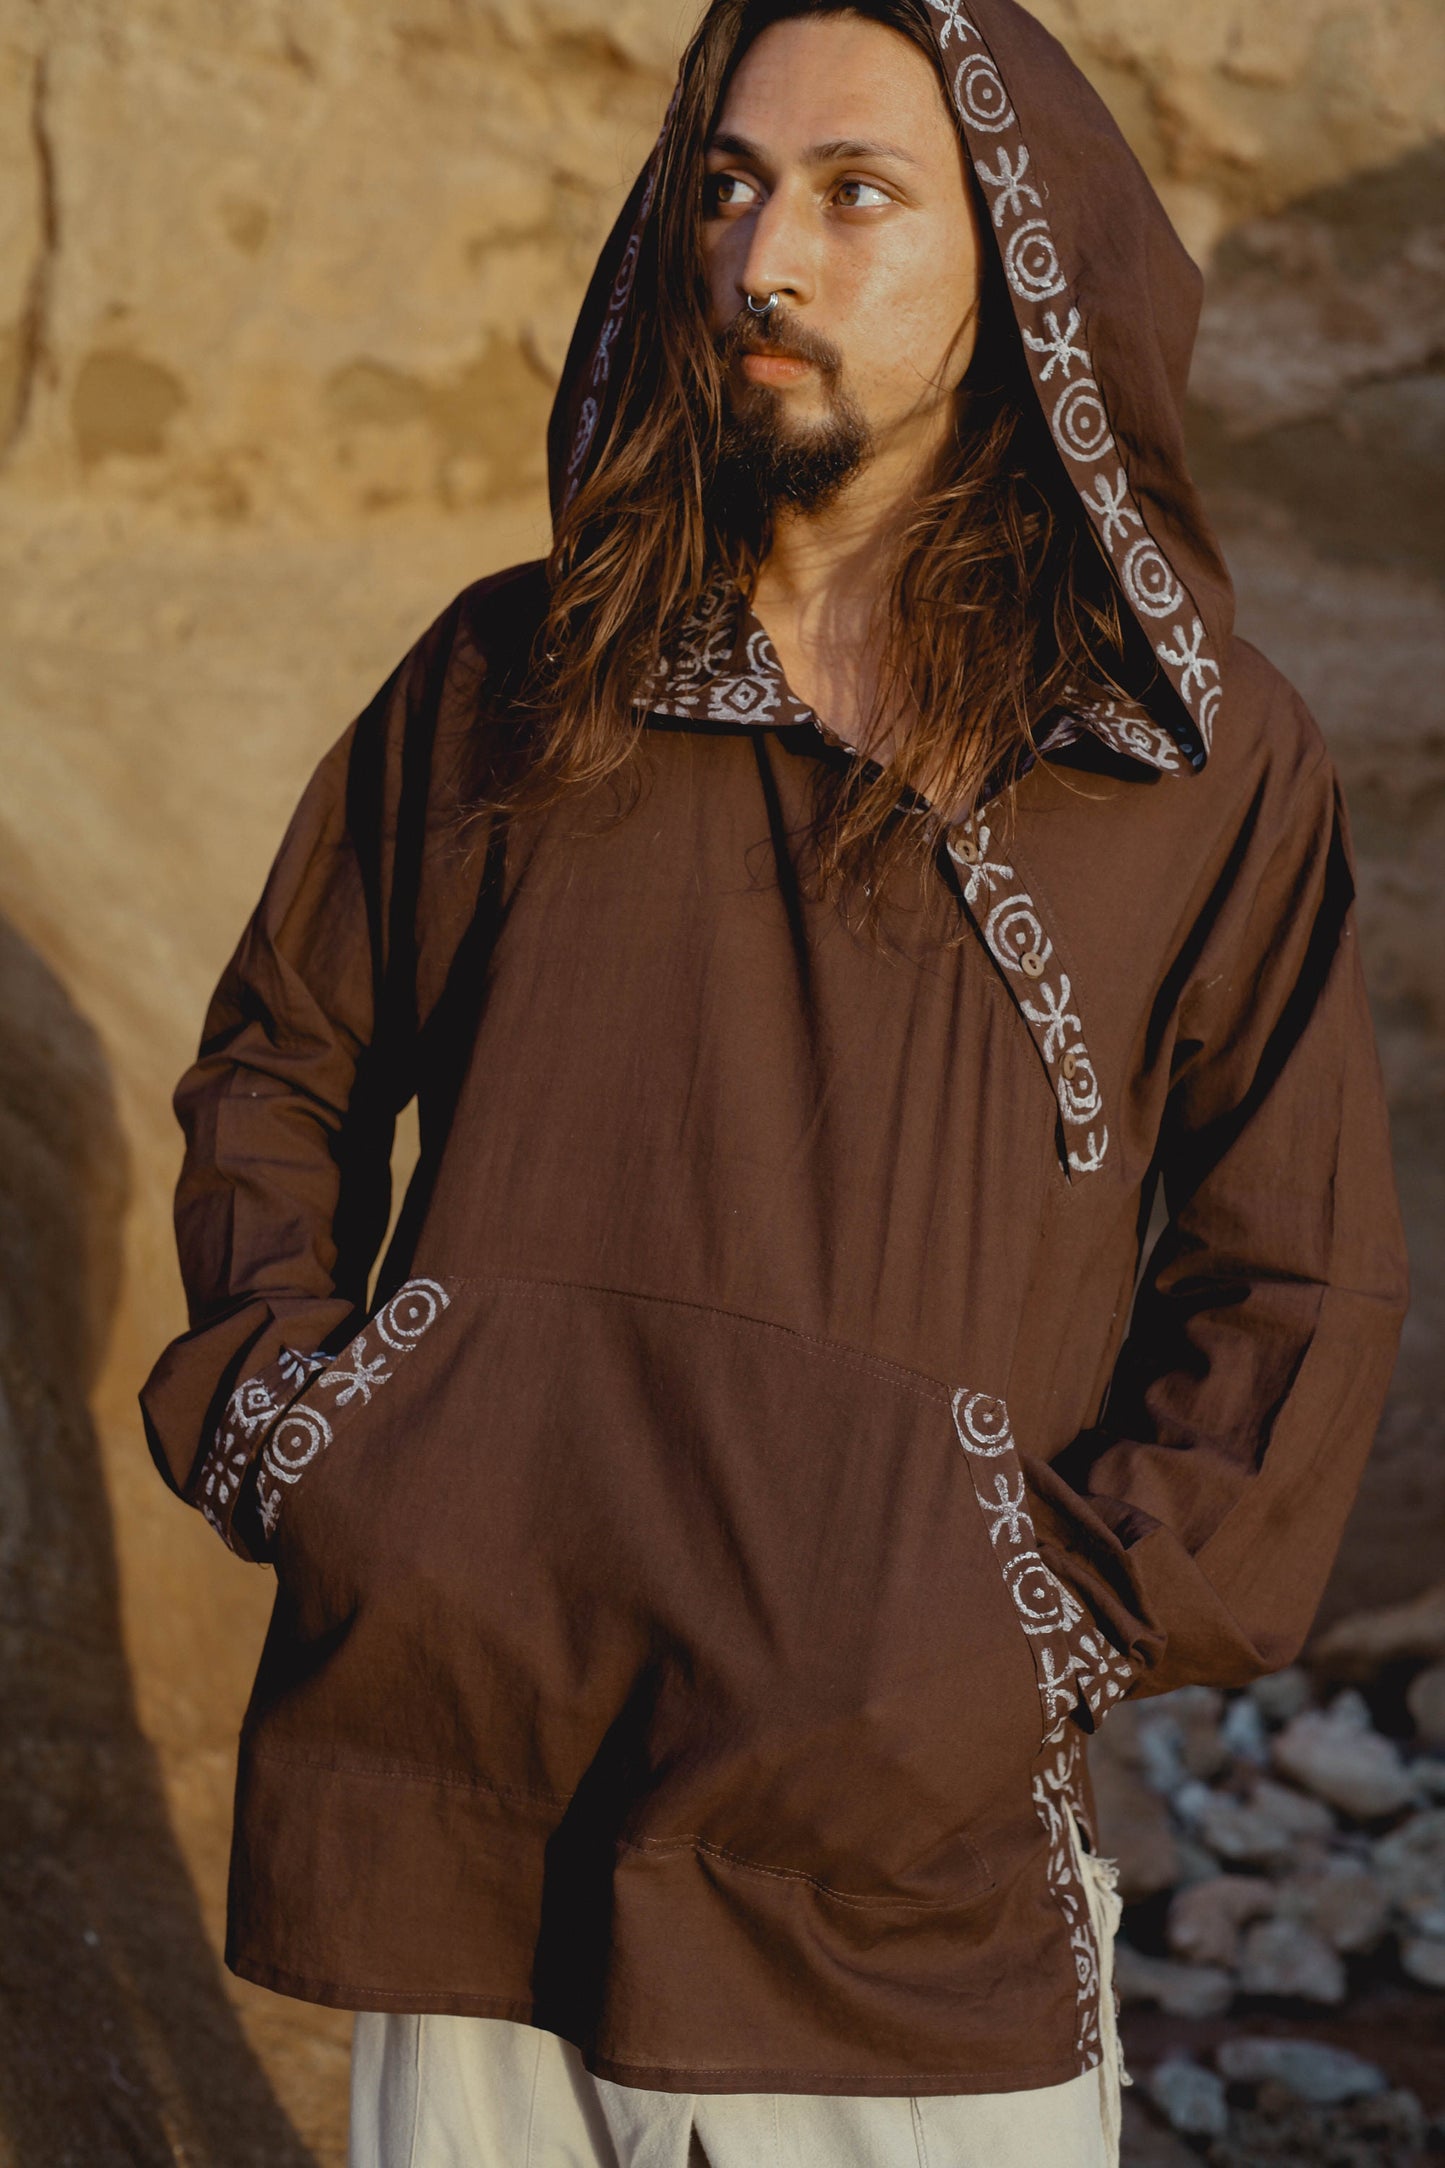 NAMAI Brown Hooded Cotton Top With Large Hoodie with Pockets Handmade Lightweight Tribal Patterns Hood Ritual Ceremony Gypsy Festival AJJAYA